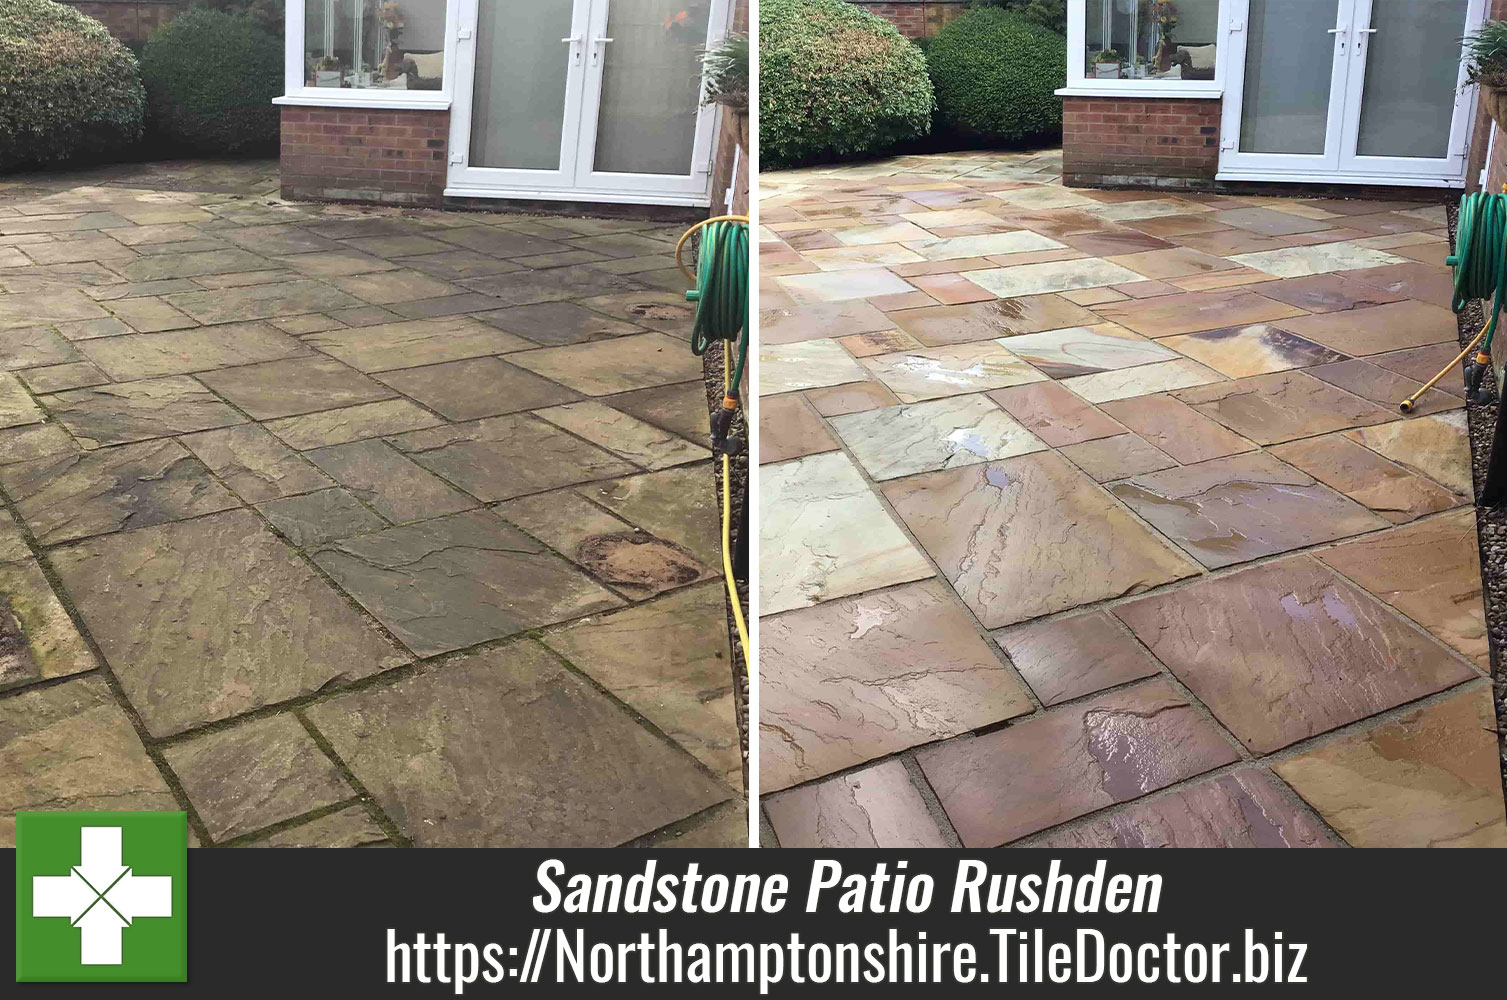 Stone Patio in Rushden Restored with Tile Doctor Patio and Driveway Cleaner